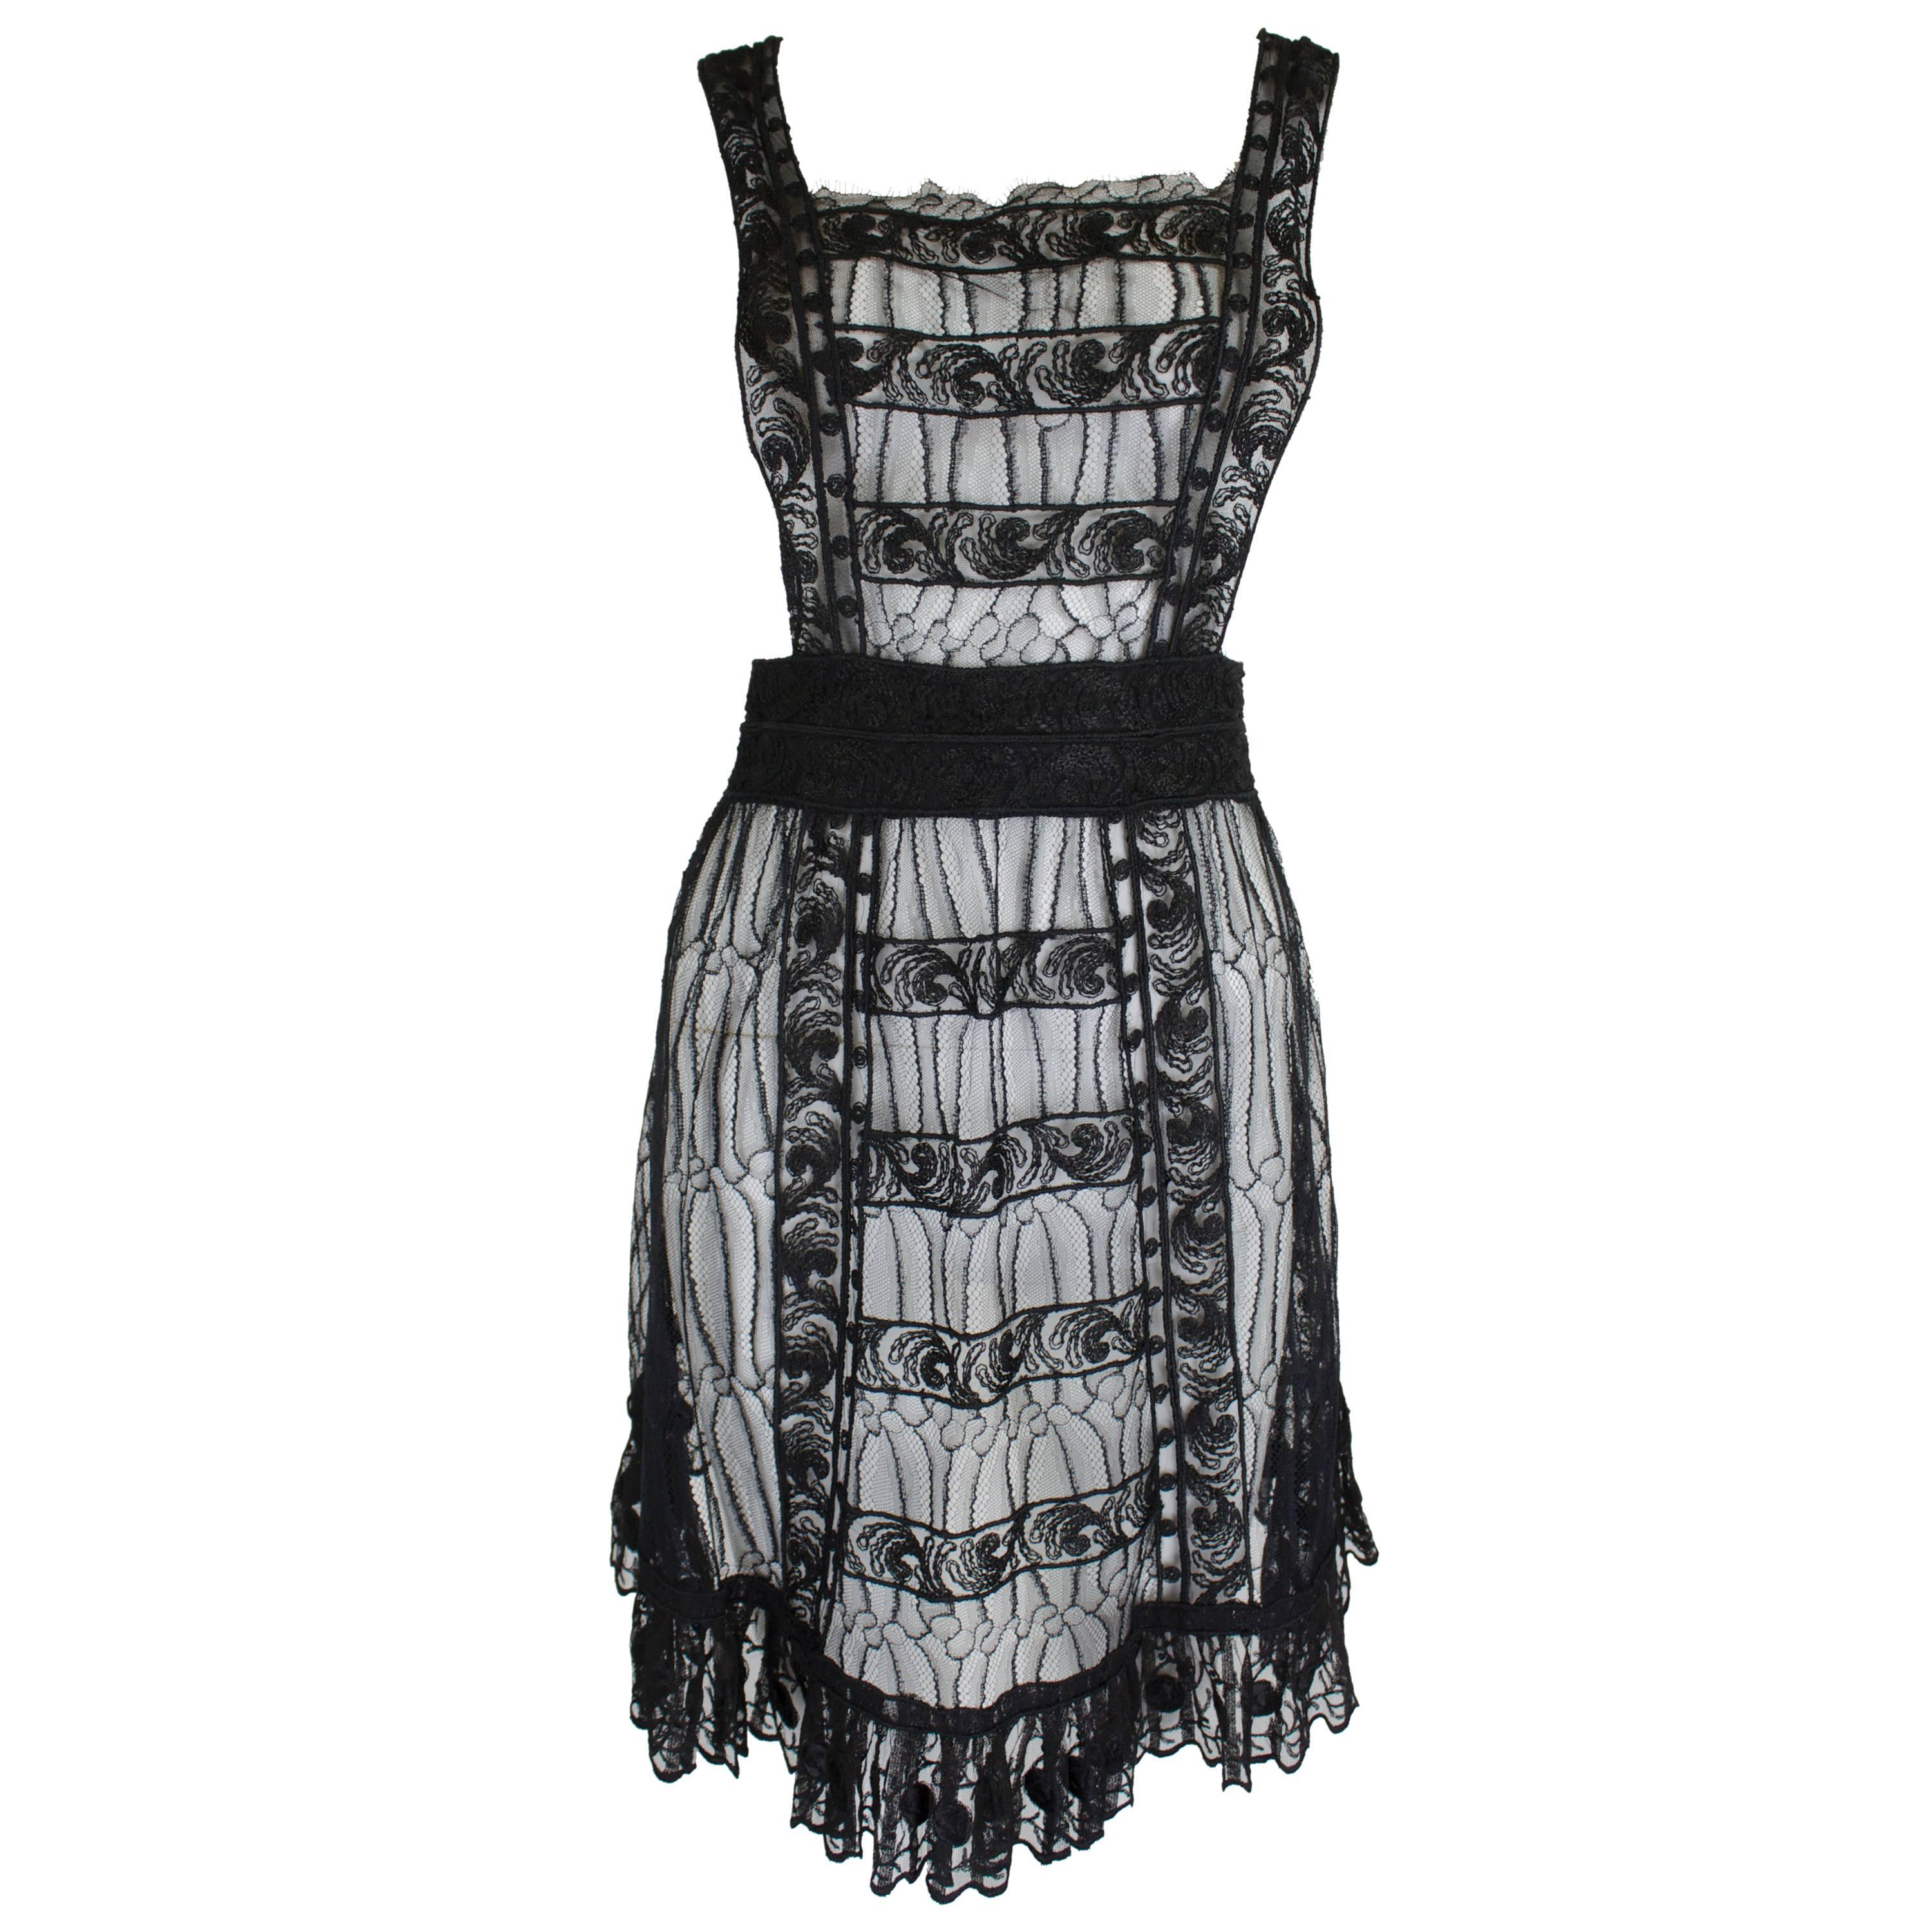 Chloe Black Lace Embroidered Pinafore For Sale